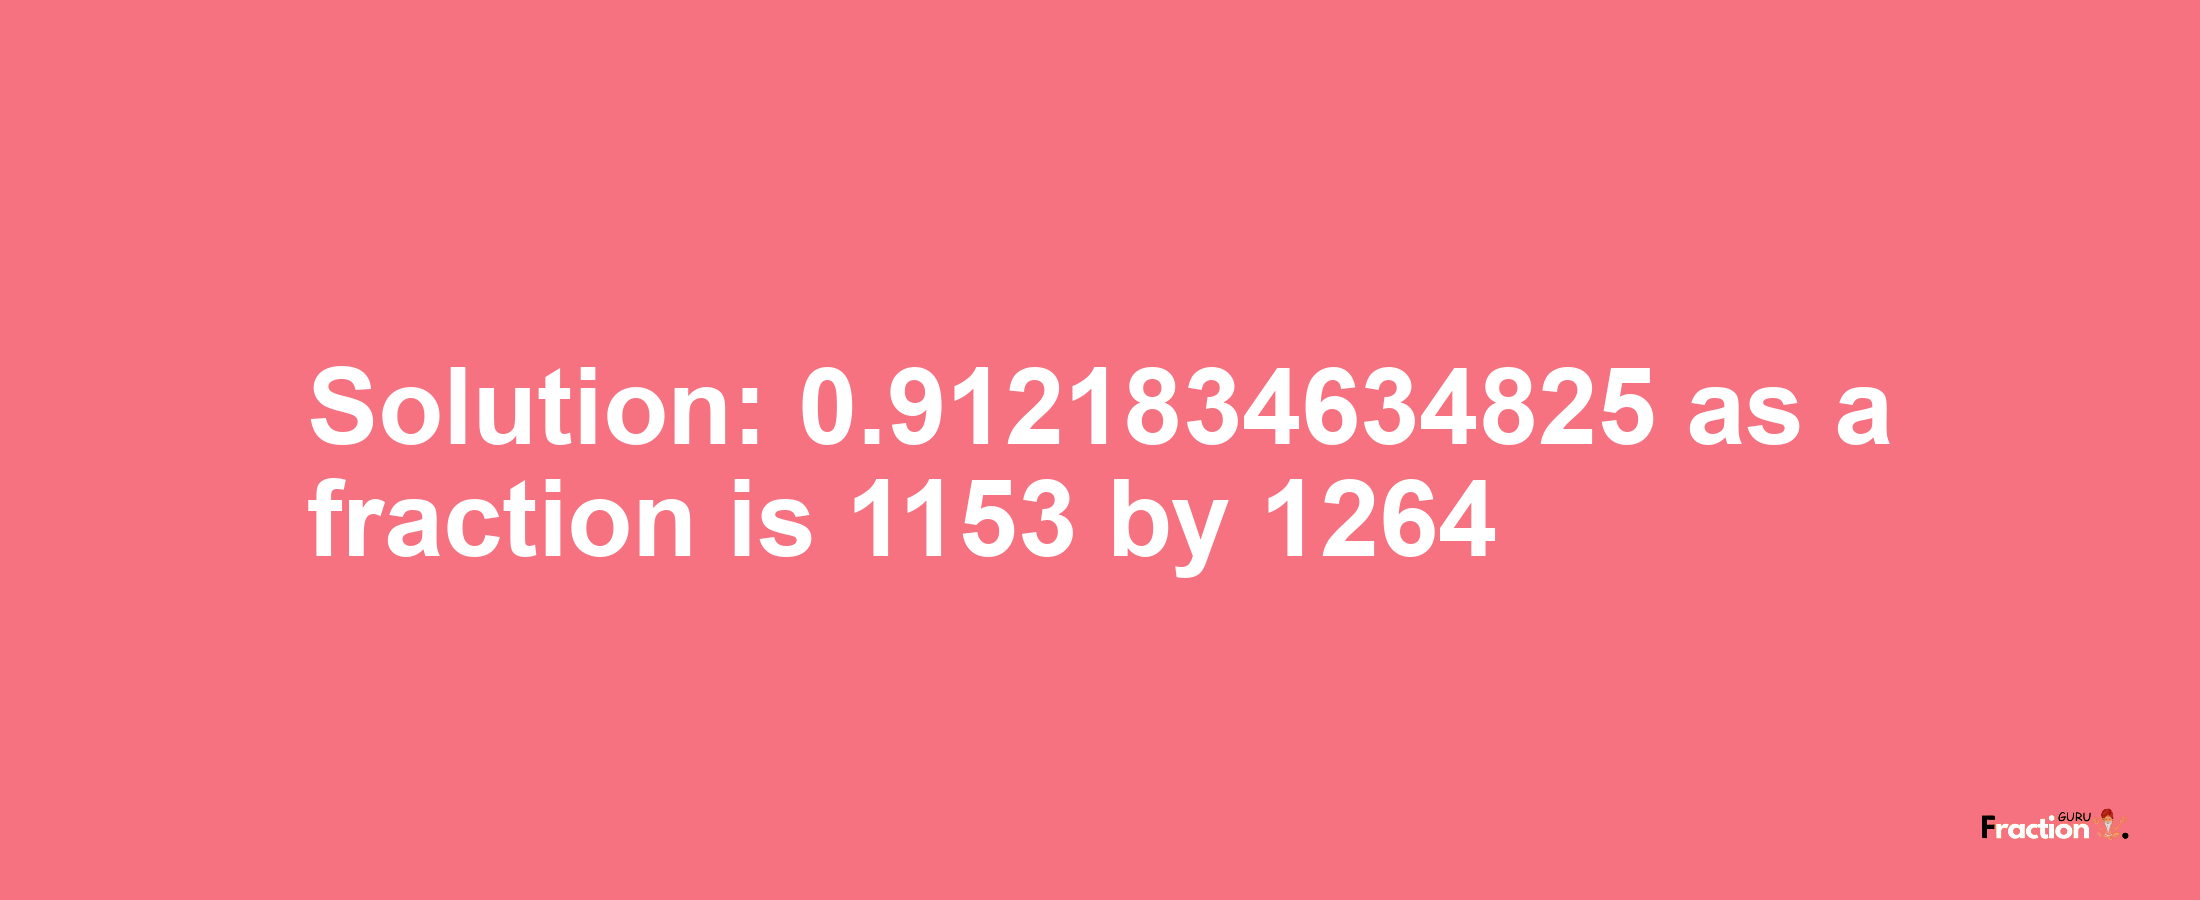 Solution:0.9121834634825 as a fraction is 1153/1264